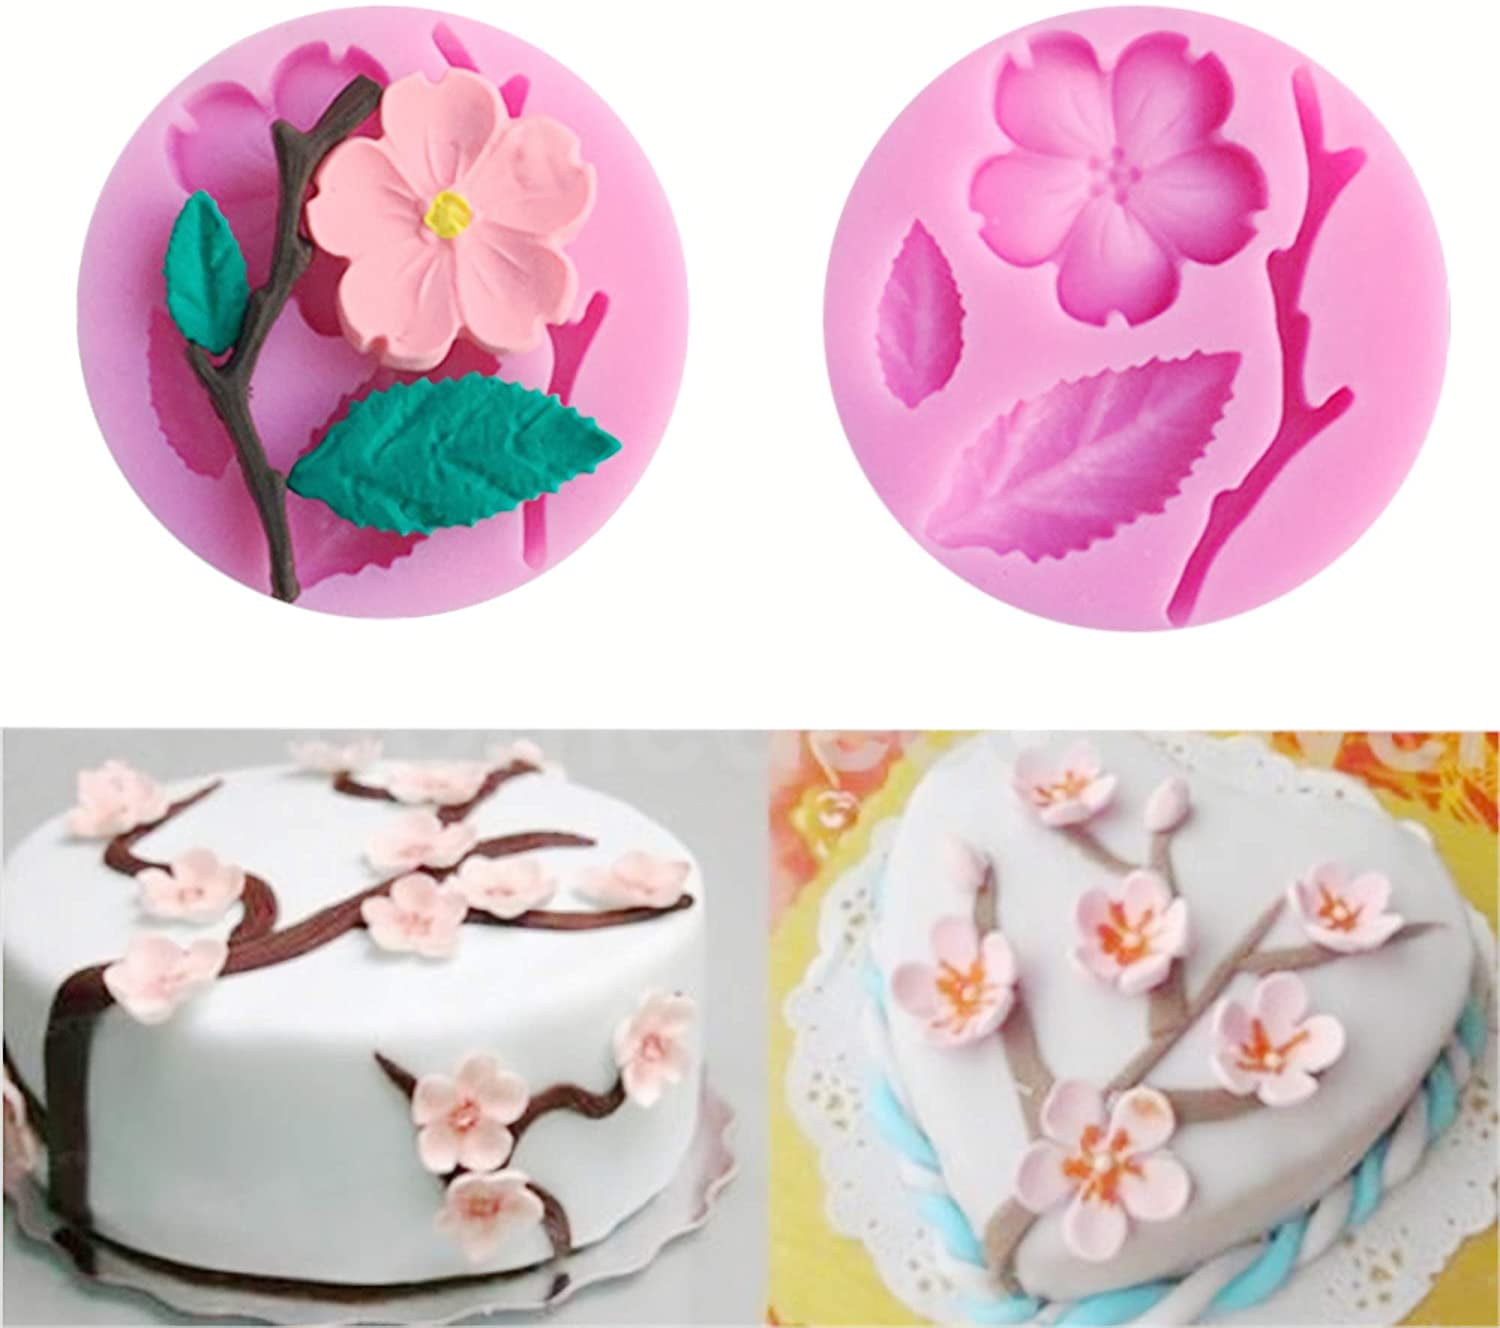 Cake Mould Flower Retro Silicone Fondant Decor Sugar Icing Mold Mat Decorating Cupcakes Sugarcraft Candies Mould 